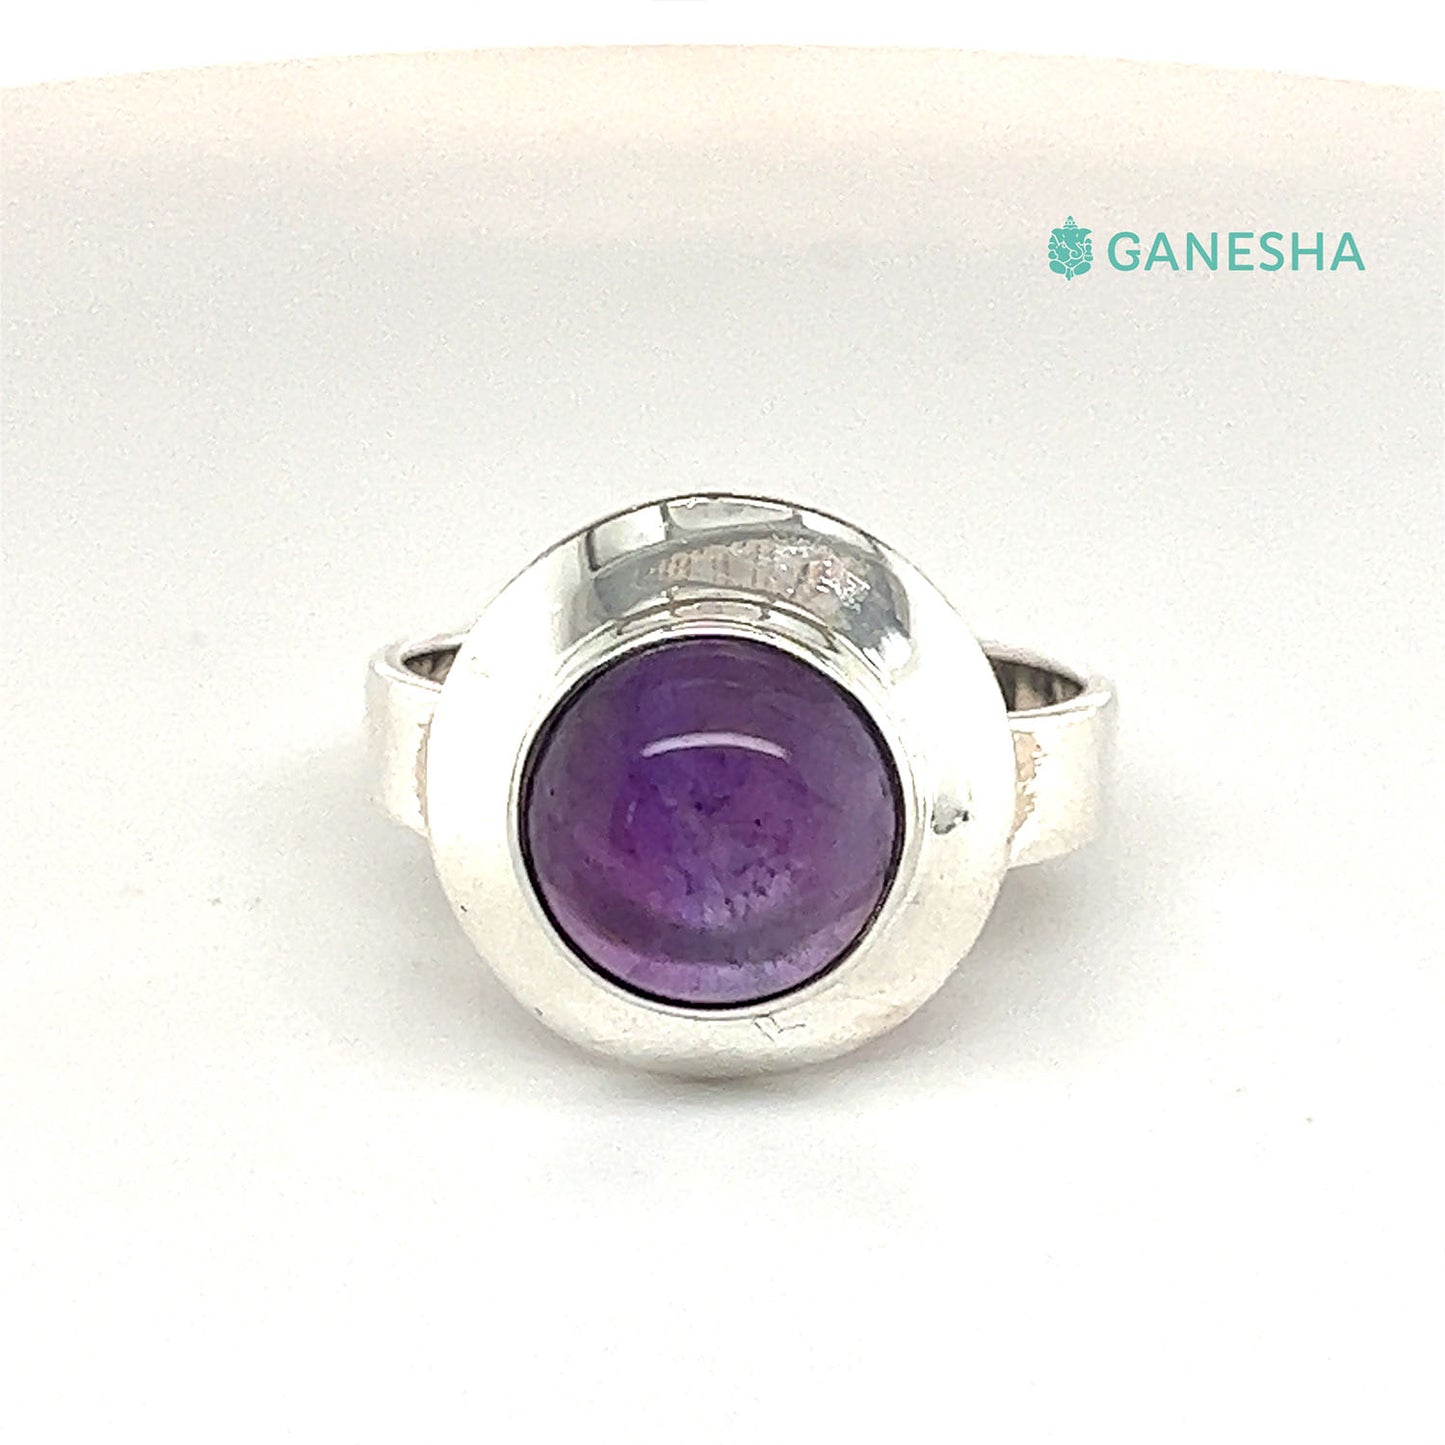 Amethyst Round Cabochons - 925 Sterling Silver Jewellery Gift Set With Free Chain, Amethyst Round Cabochons - 925 Sterling Silver Jewellery Gift, Jewellery Gift Set With Free Chain,  925 Sterling Silver Jewellery Gift Set, Gift Set With Free Chain